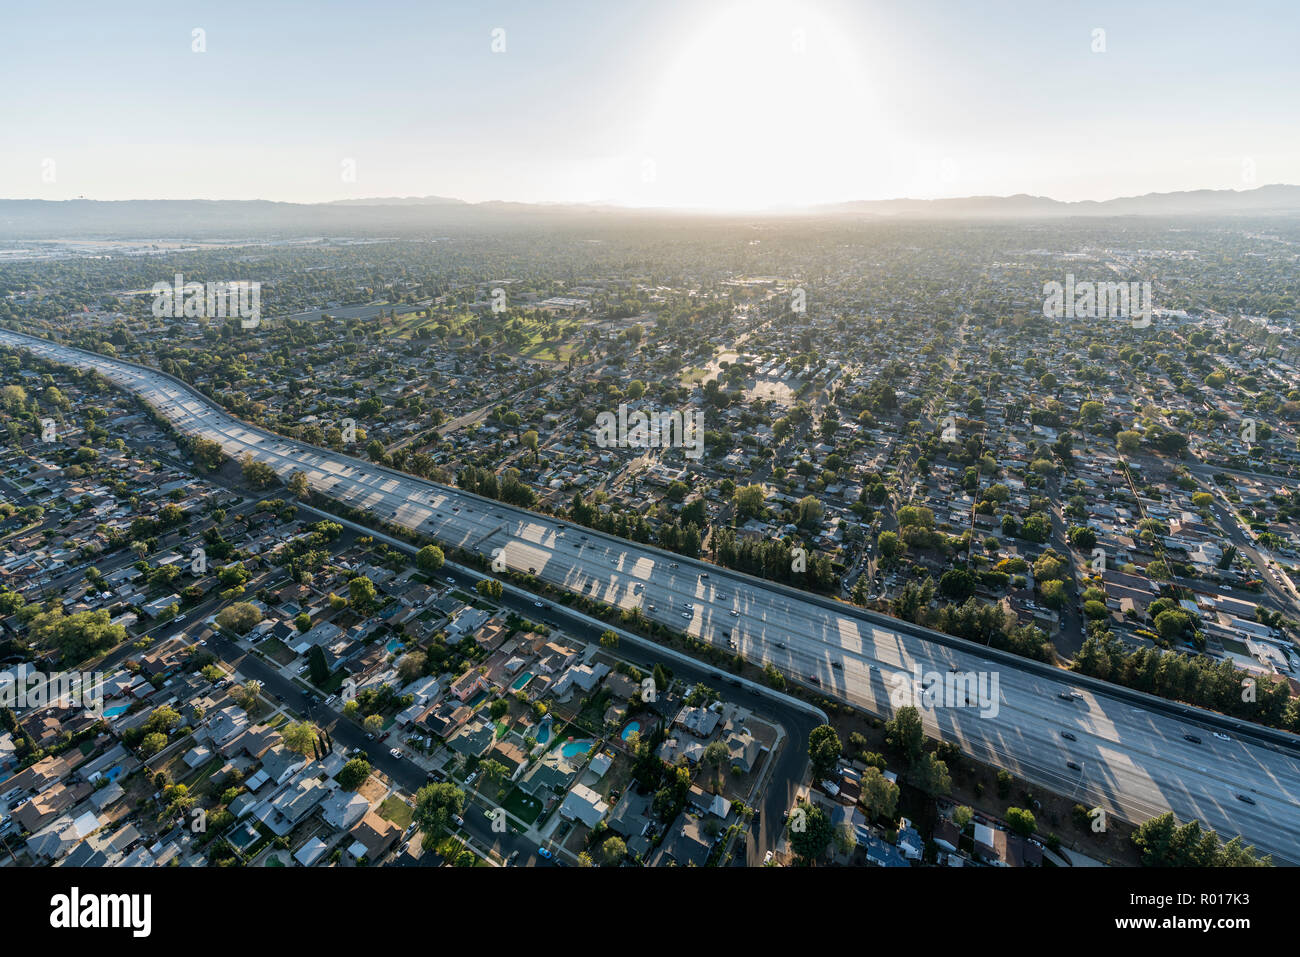 Sunset aerial view of Route 405 freeway crossing the San Fernando Valley in Los Angeles, California. Stock Photo